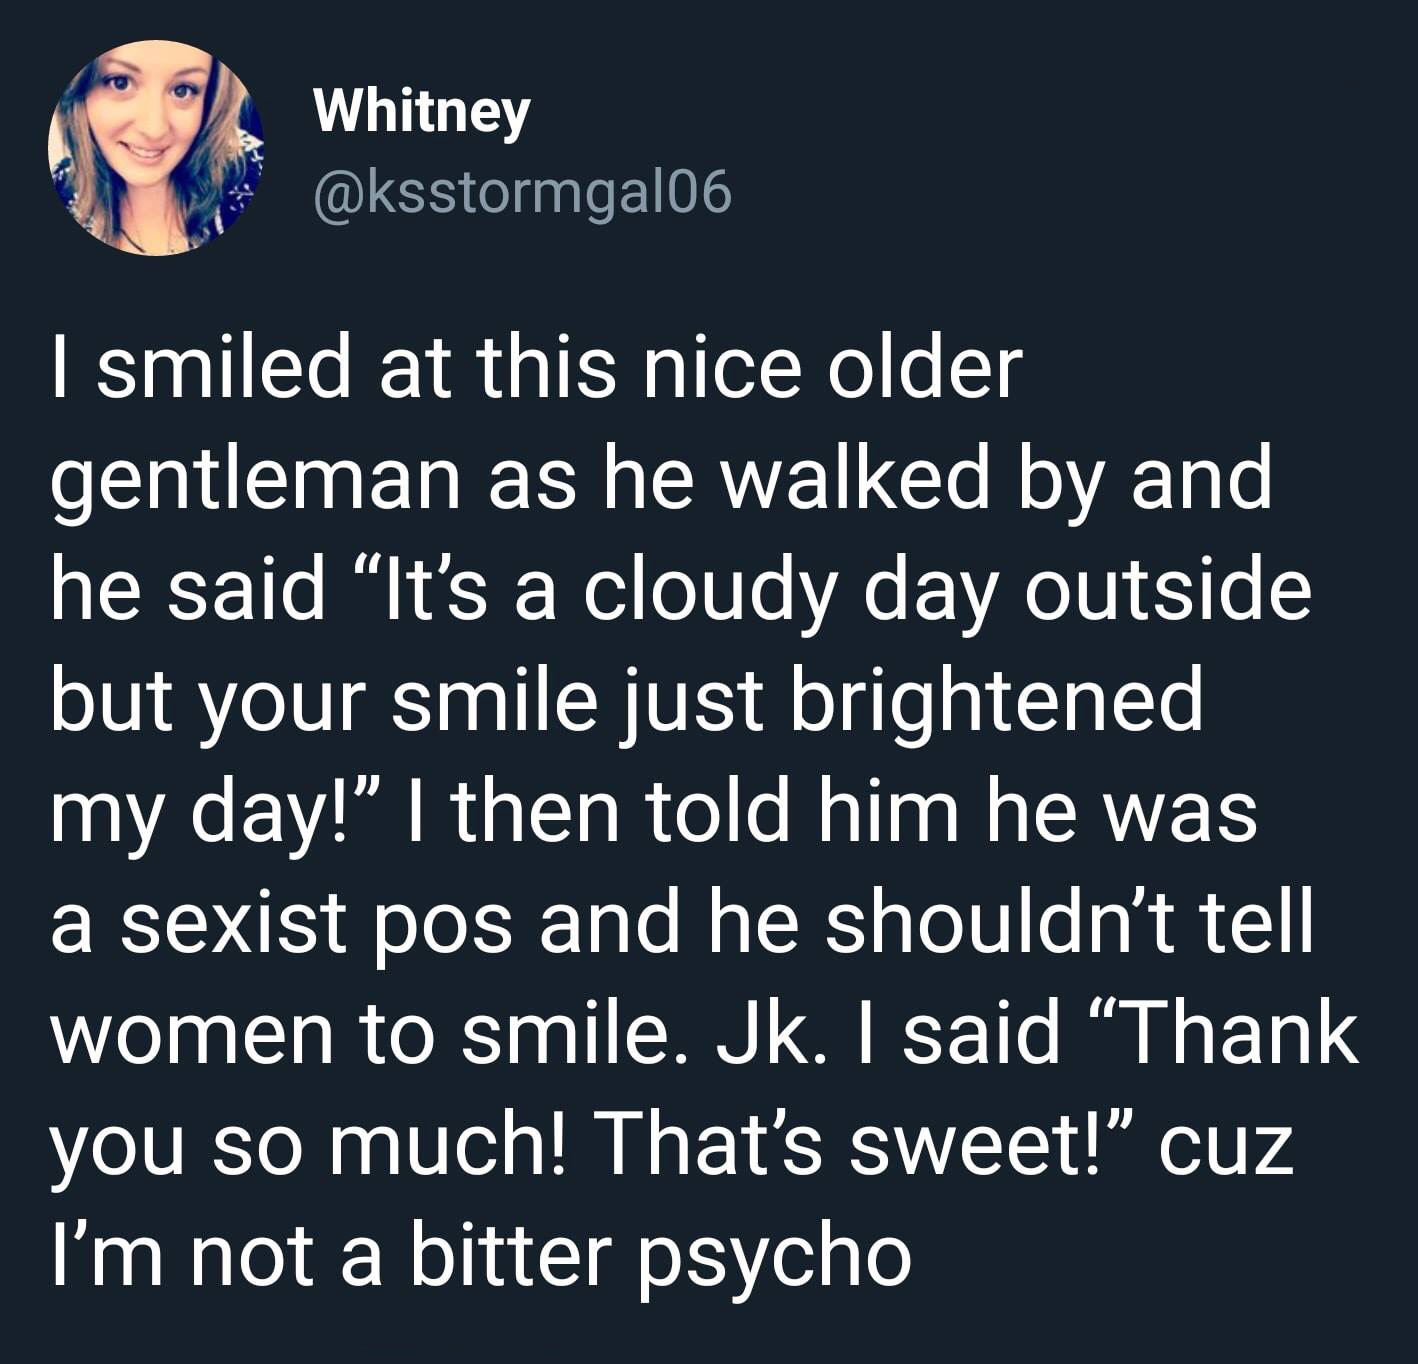 presentation - Whitney I smiled at this nice older gentleman as he walked by and he said "It's a cloudy day outside but your smile just brightened my day!" I then told him he was a sexist pos and he shouldn't tell women to smile. Jk. I said Thank you so m